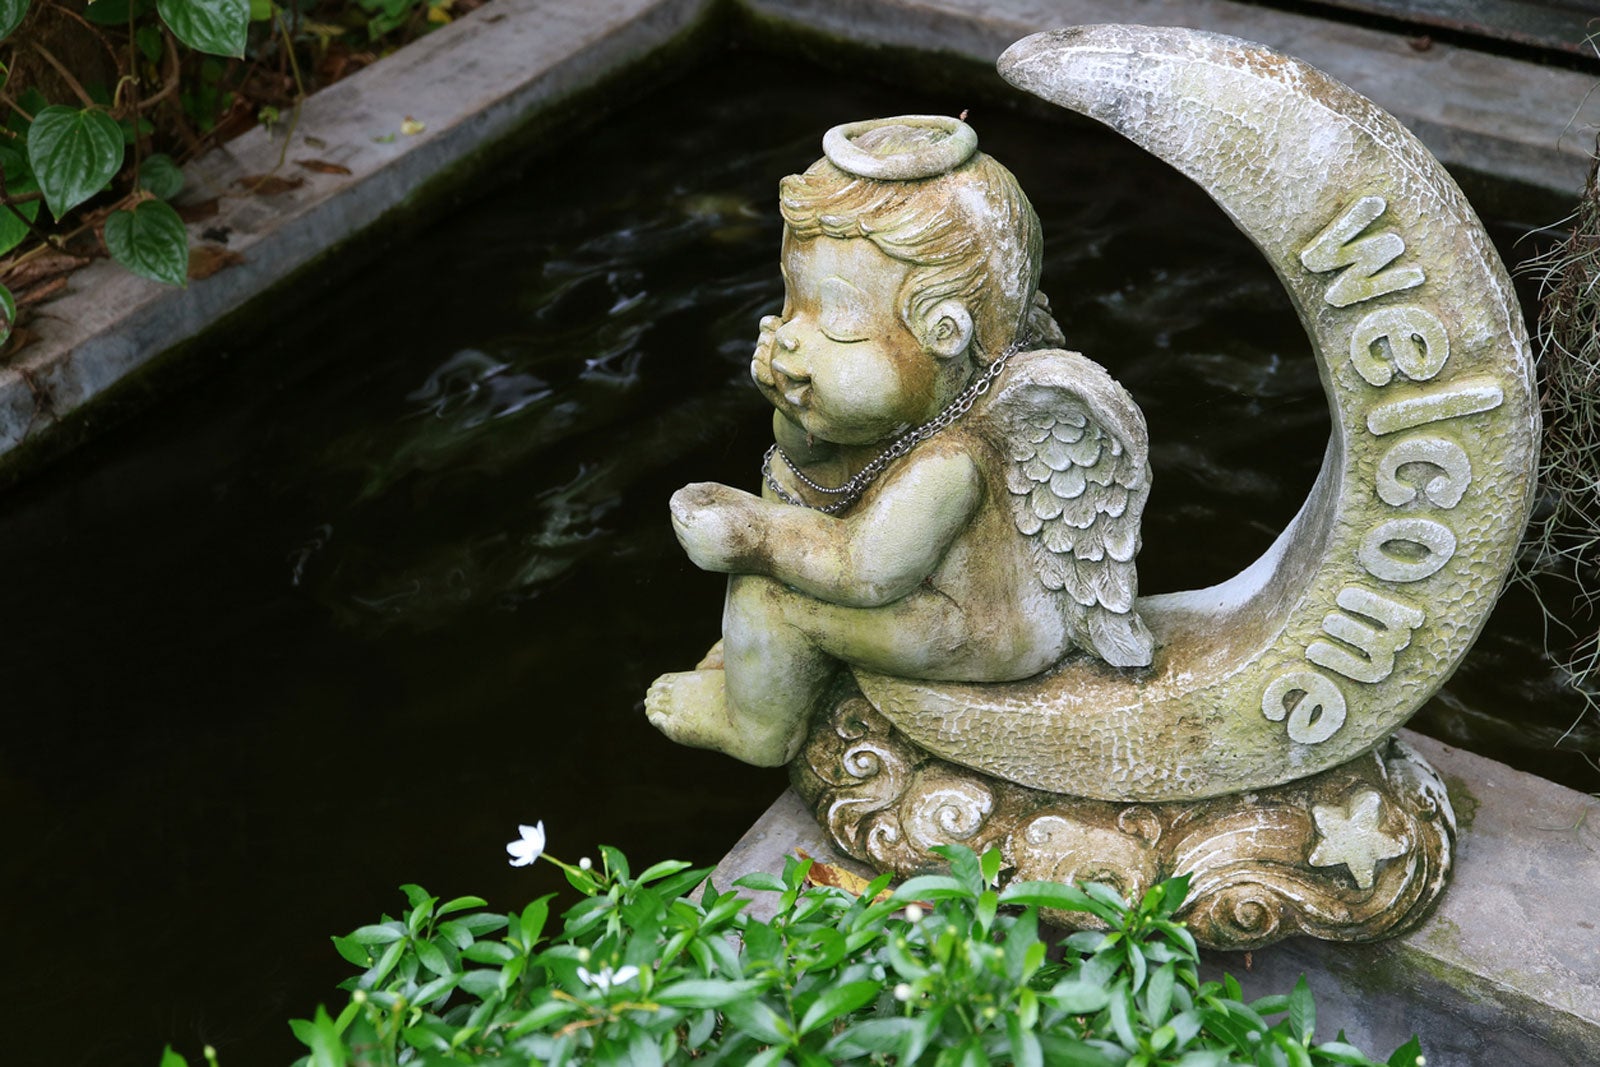 Landscaping With Statues Using Garden, Make Your Own Garden Statue